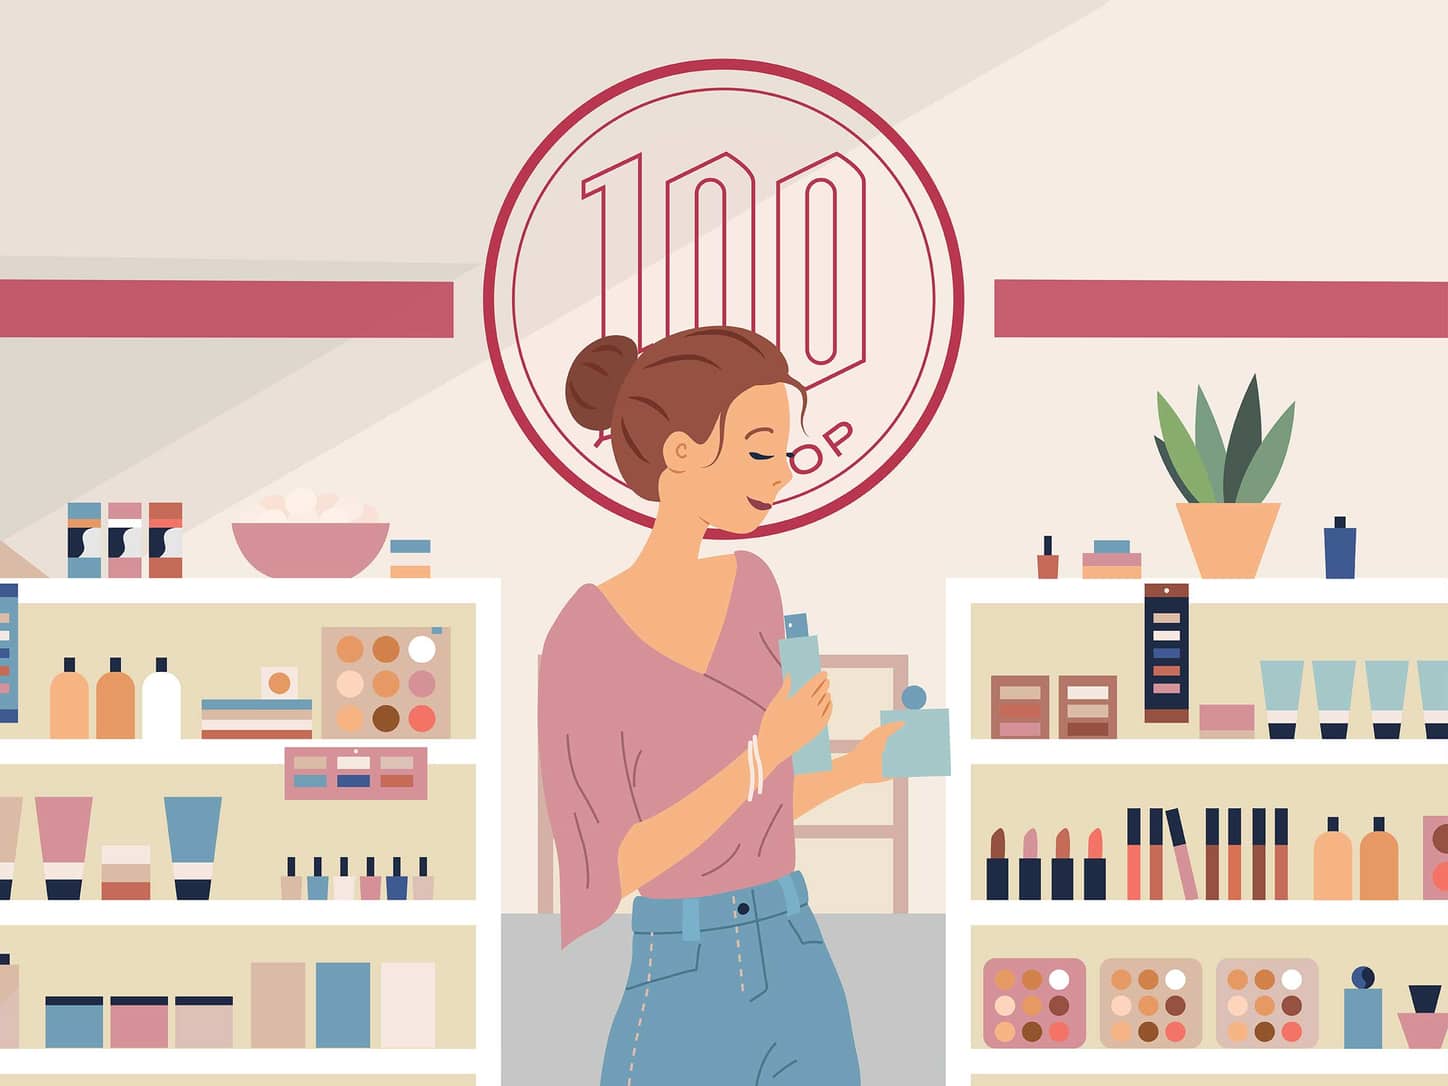 Beautiful Skin on a Budget: 8 Skincare Products You Can Find at a 100-Yen Shop